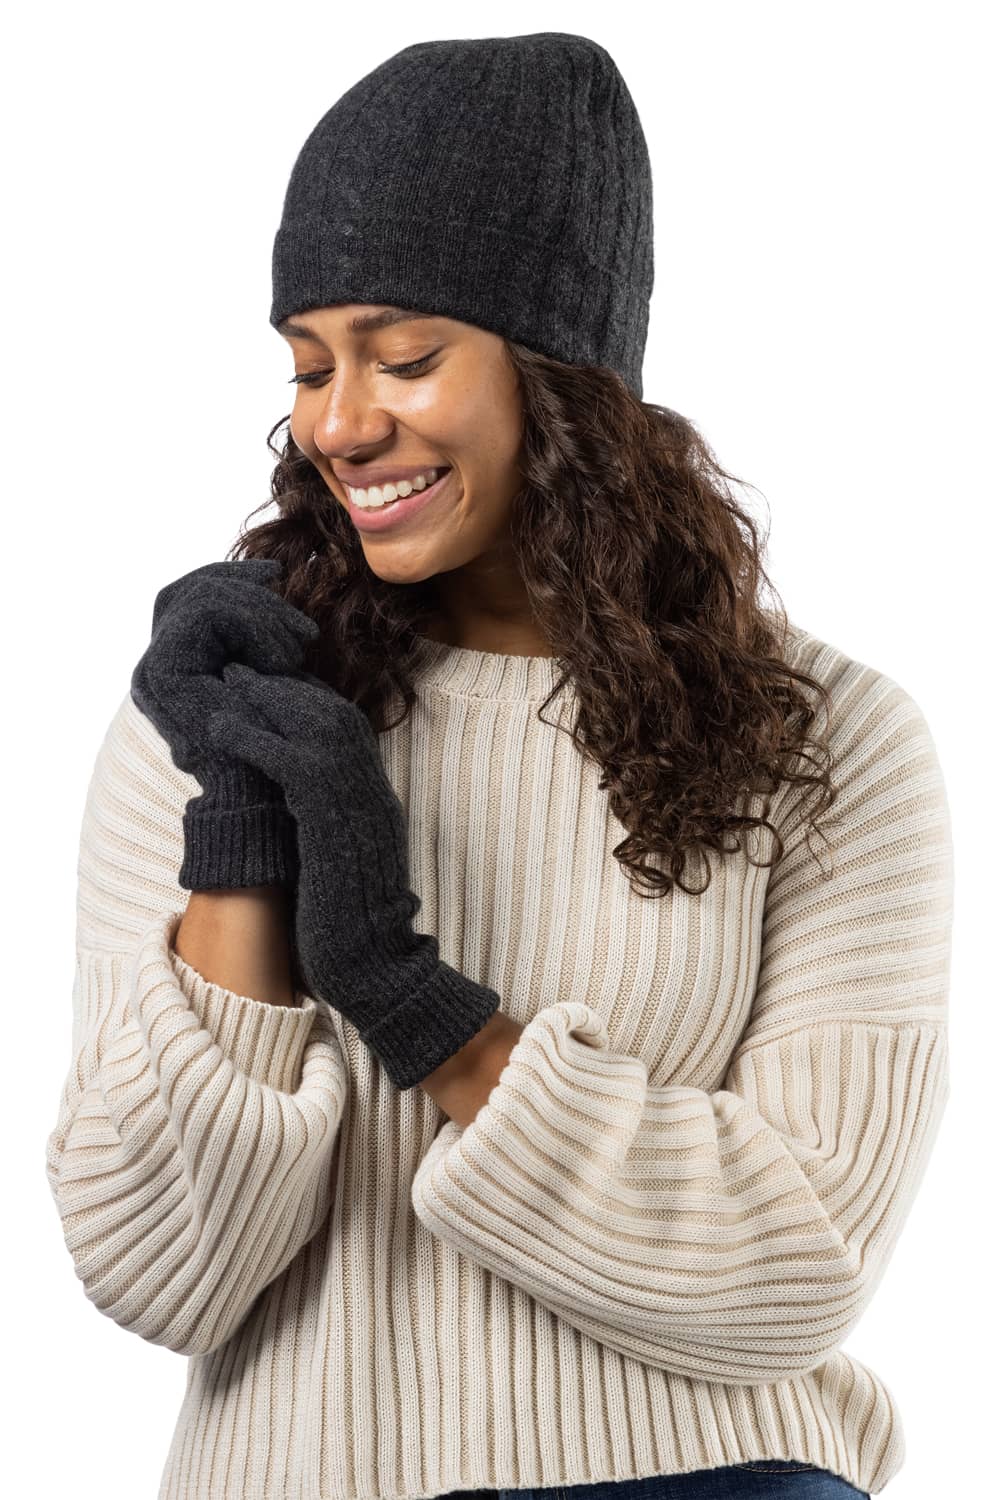 Women's 2pc 100% Pure Cashmere Cable Knit Hat & Glove Set with Gift Box Womens>Accessories>Cashmere Set Fishers Finery Charcoal One Size Fits Most 